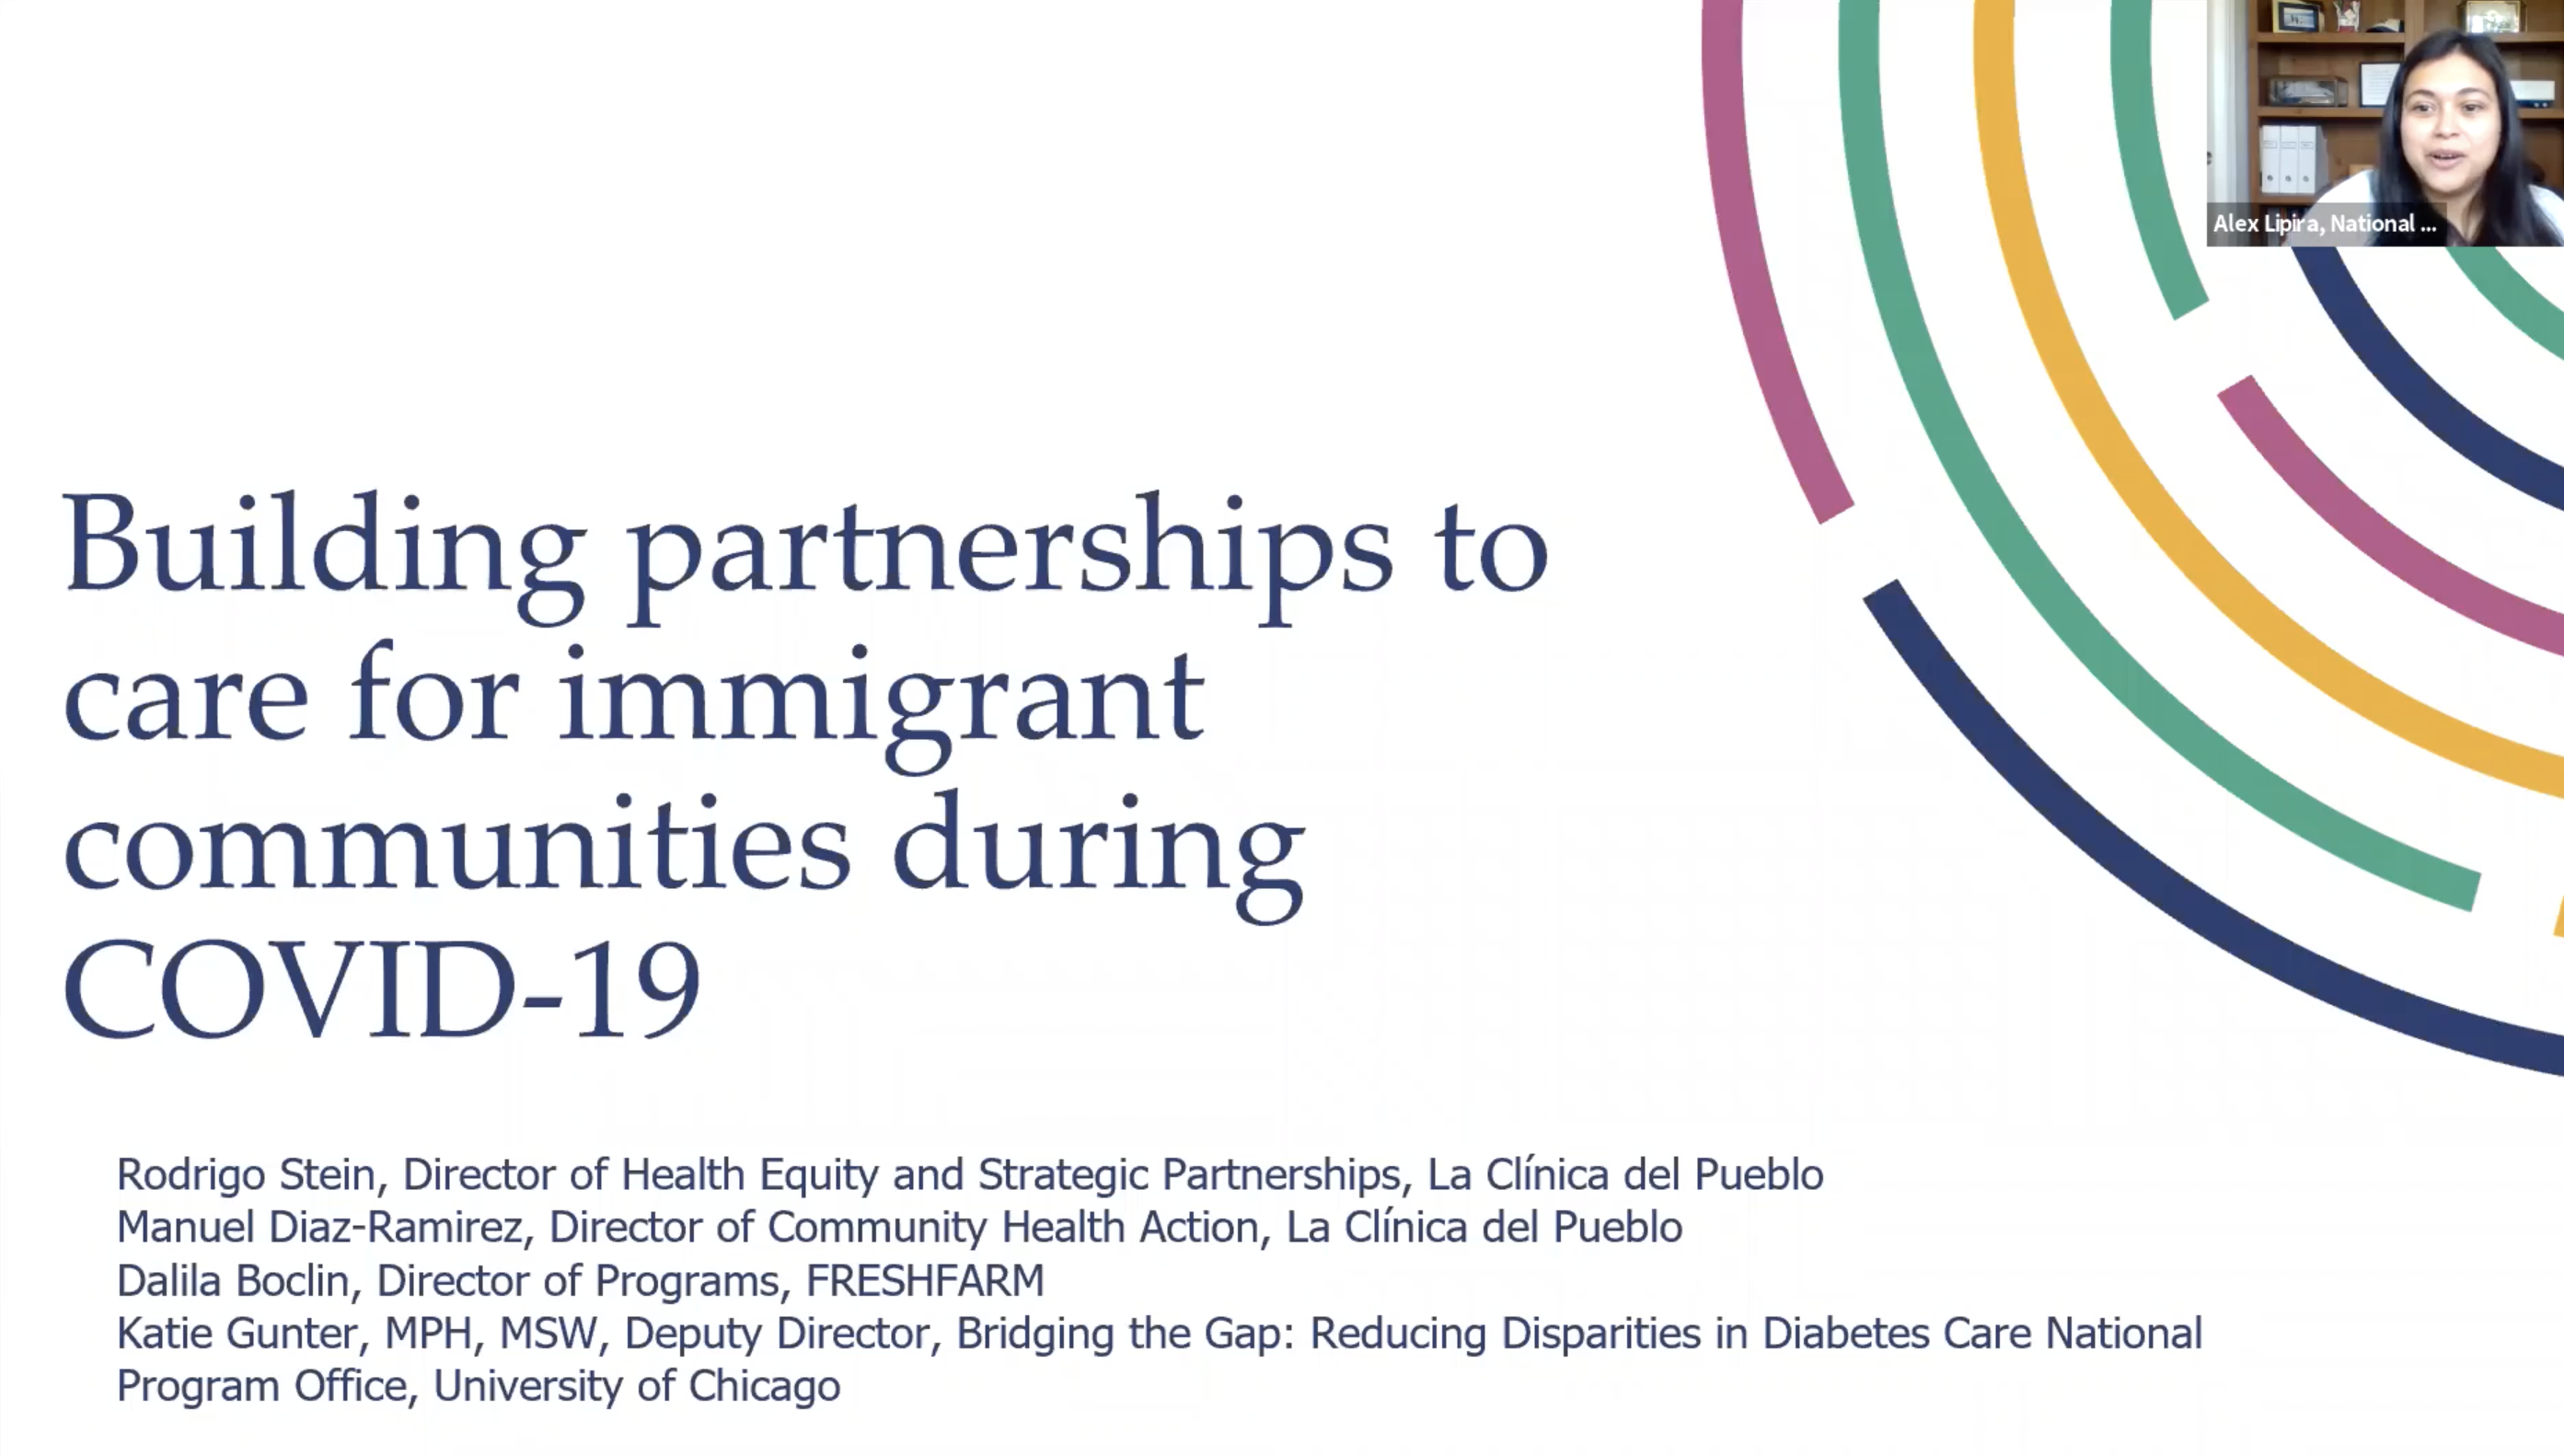 Building Partnerships to Care for Immigrant Communities During COVID-19